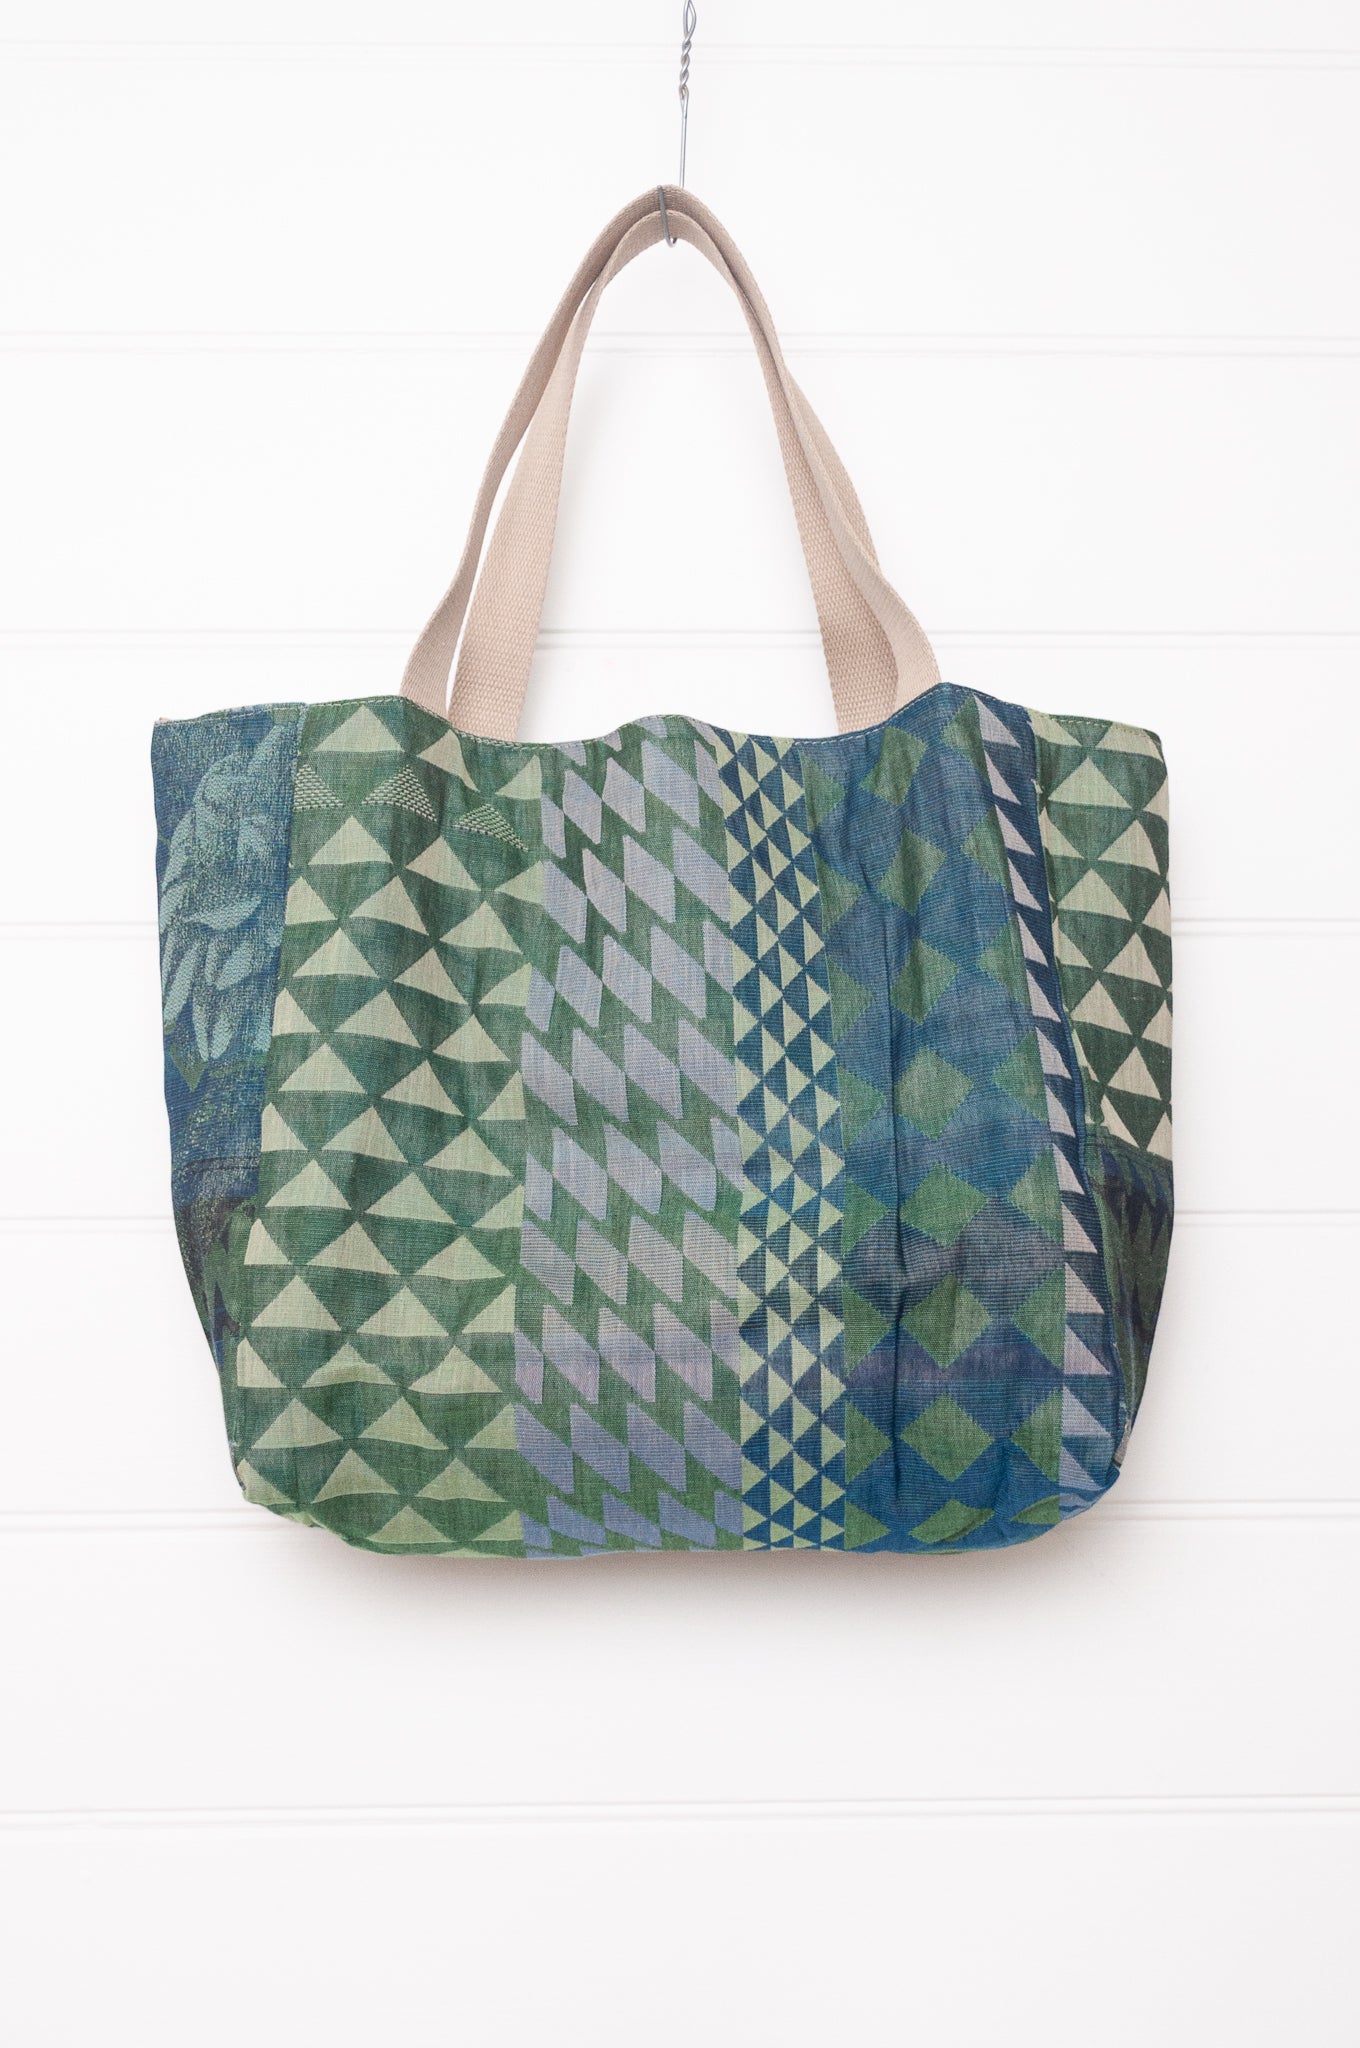 Letol made in France medium sized tote bag, organic cotton jacquard weave reversible, Casimir in green and blue.